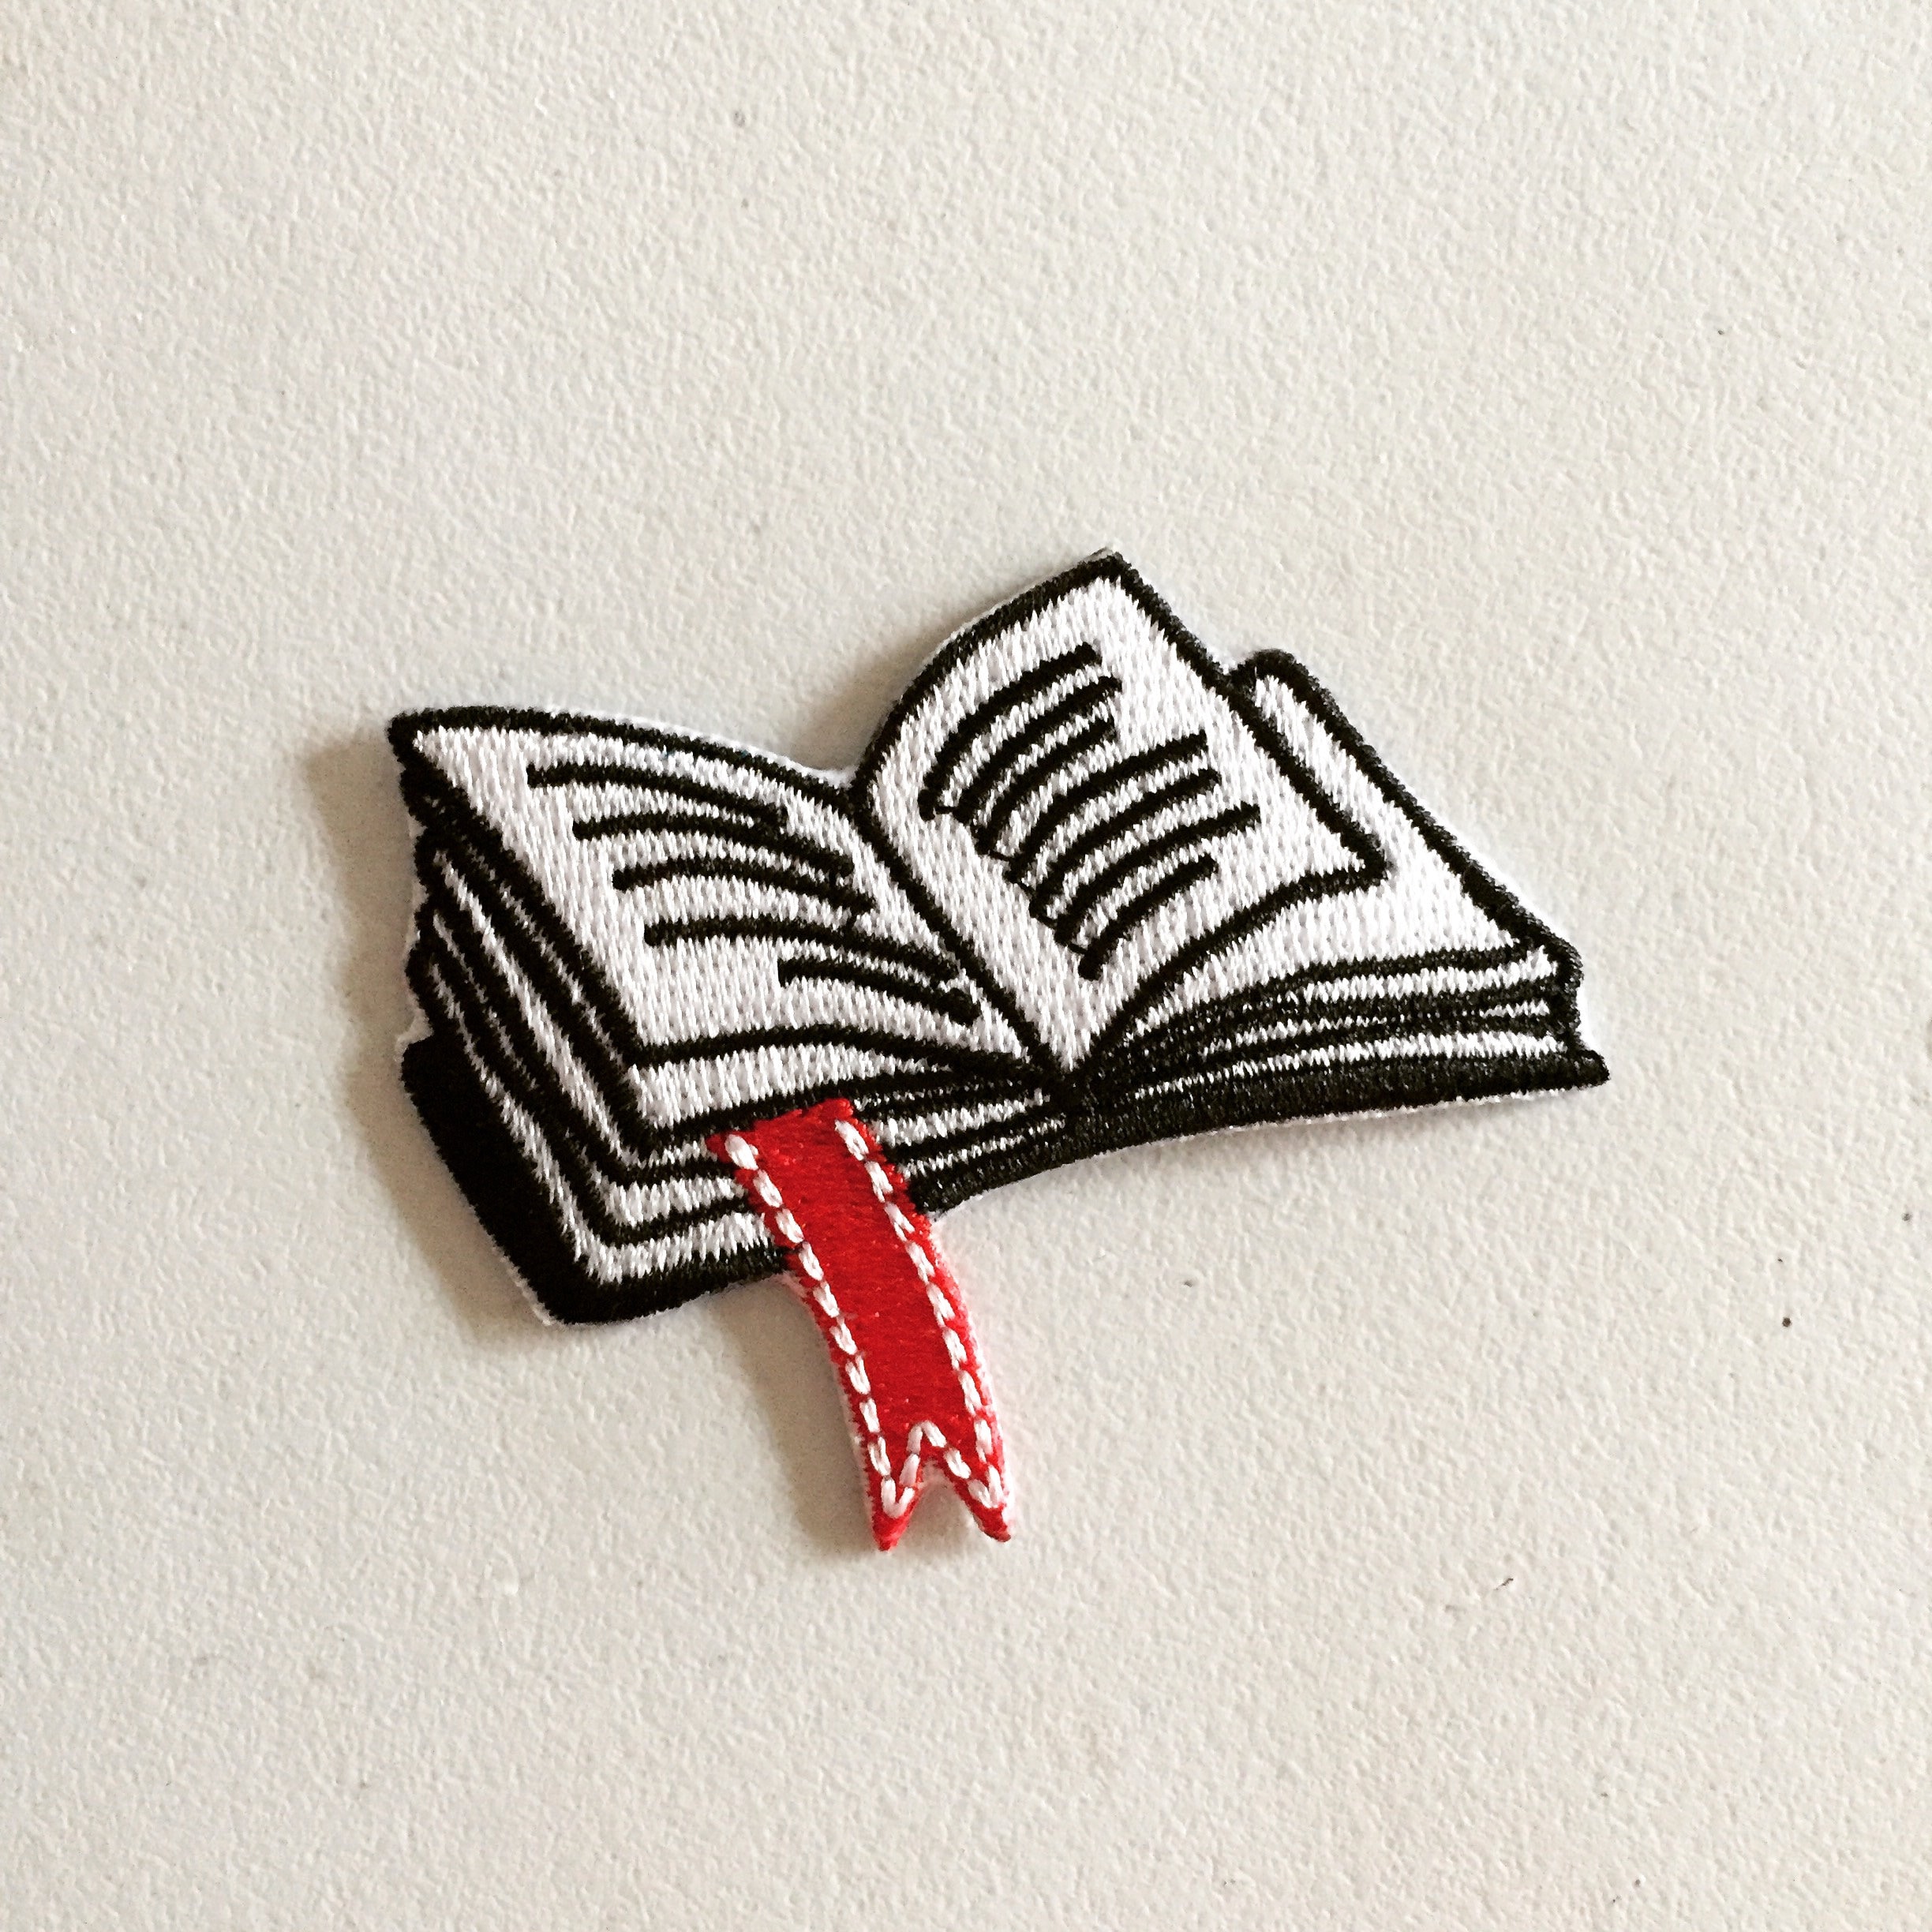 Book Lover Embroidery Patch island book Lover Librarian or Avid